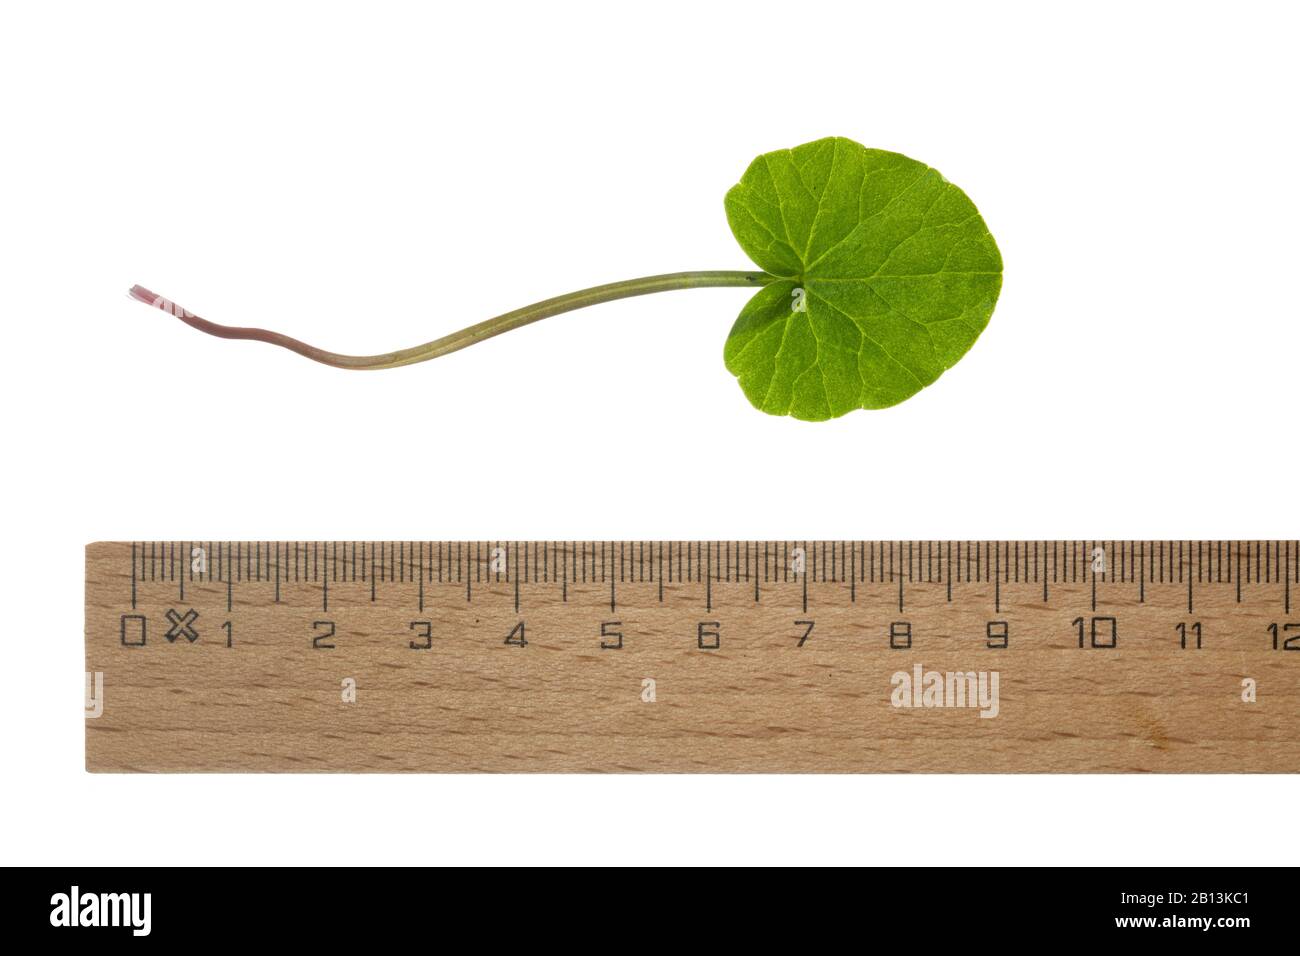 lesser celandine, fig-root butter-cup (Ranunculus ficaria, Ficaria verna), leaf, cutout with ruler, Germany Stock Photo